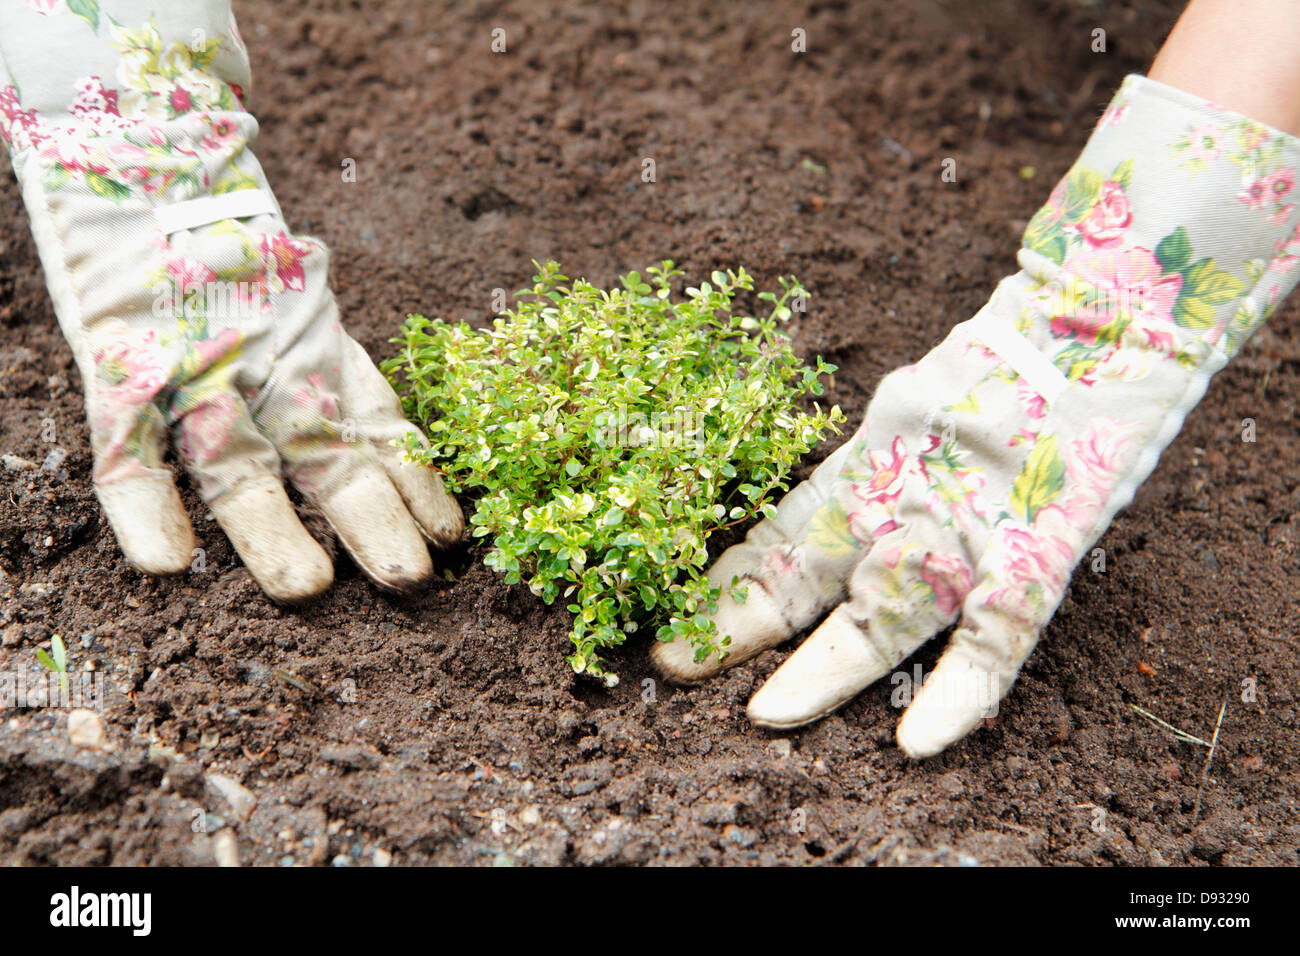 Hands planting thyme Stock Photo